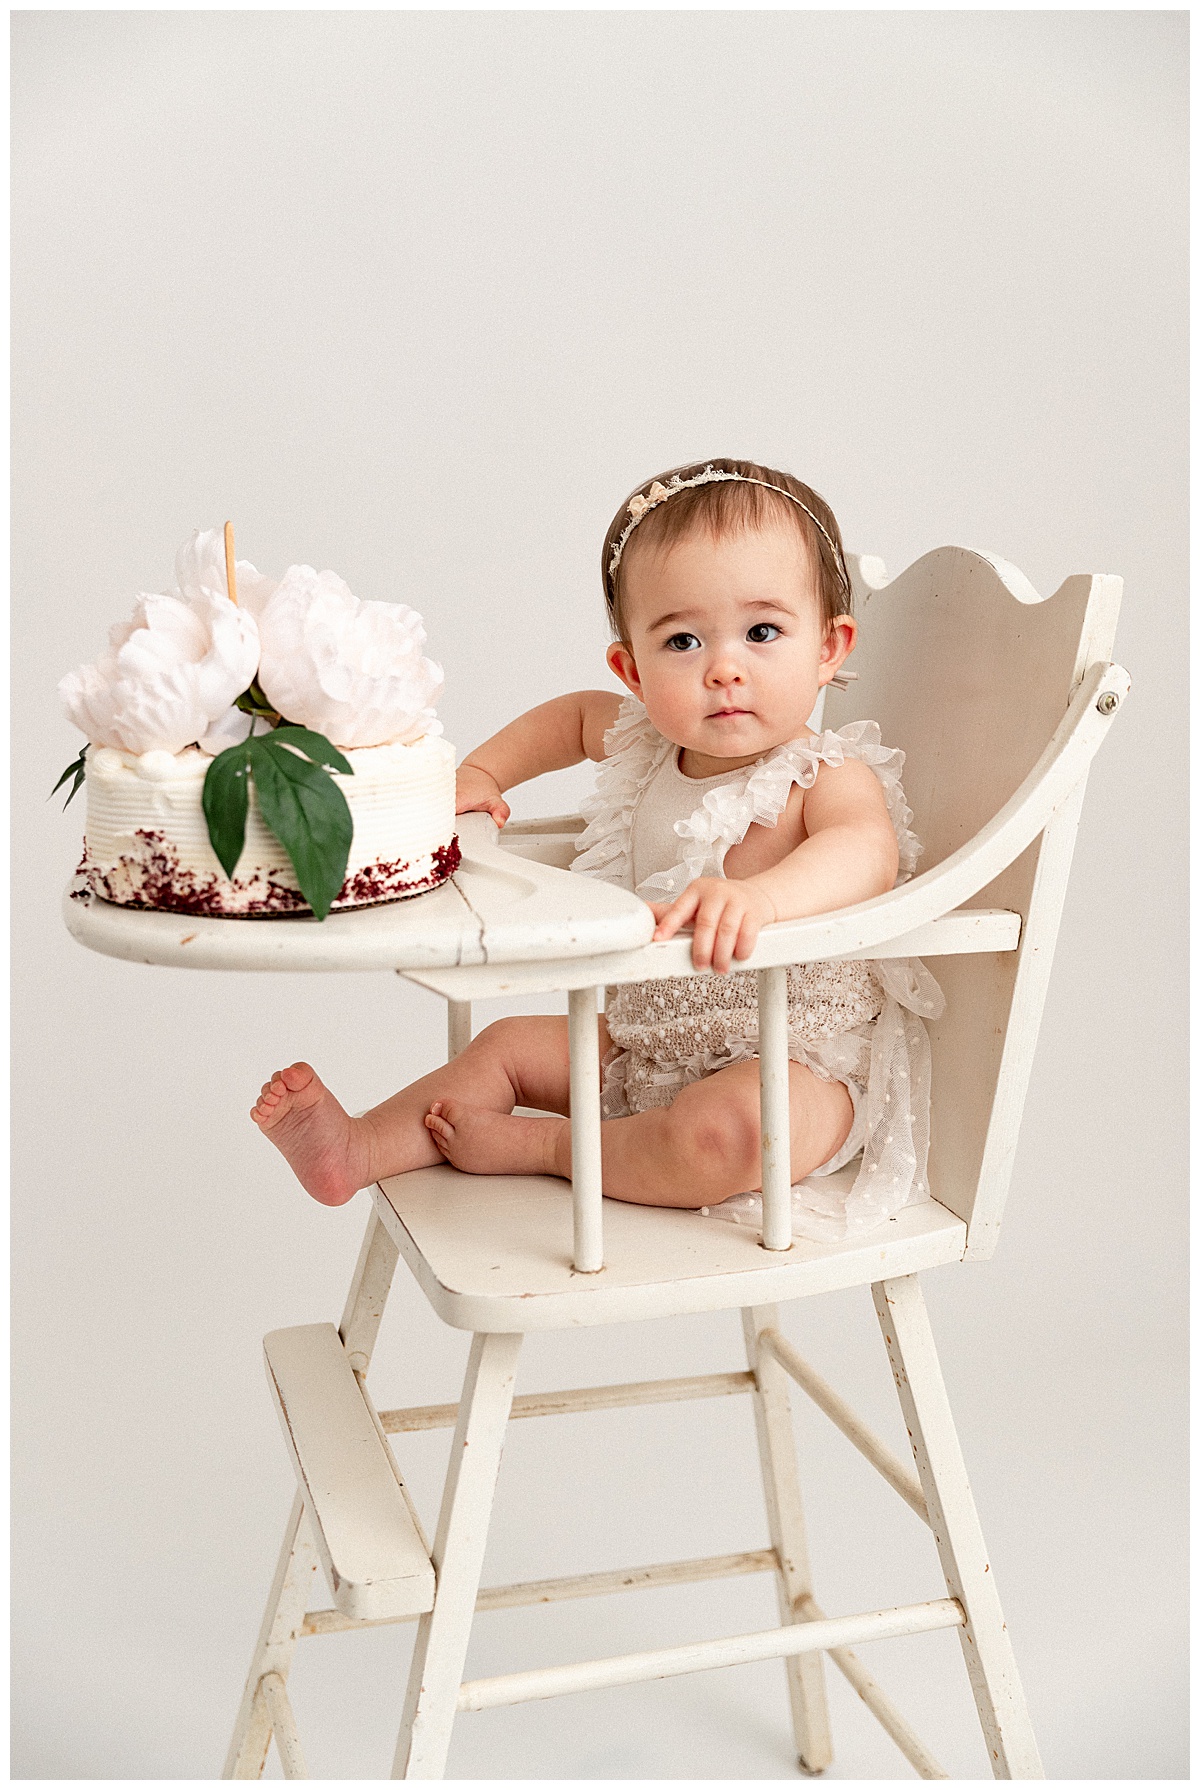 Little girl is holding high chair for First Birthday Cake Smash